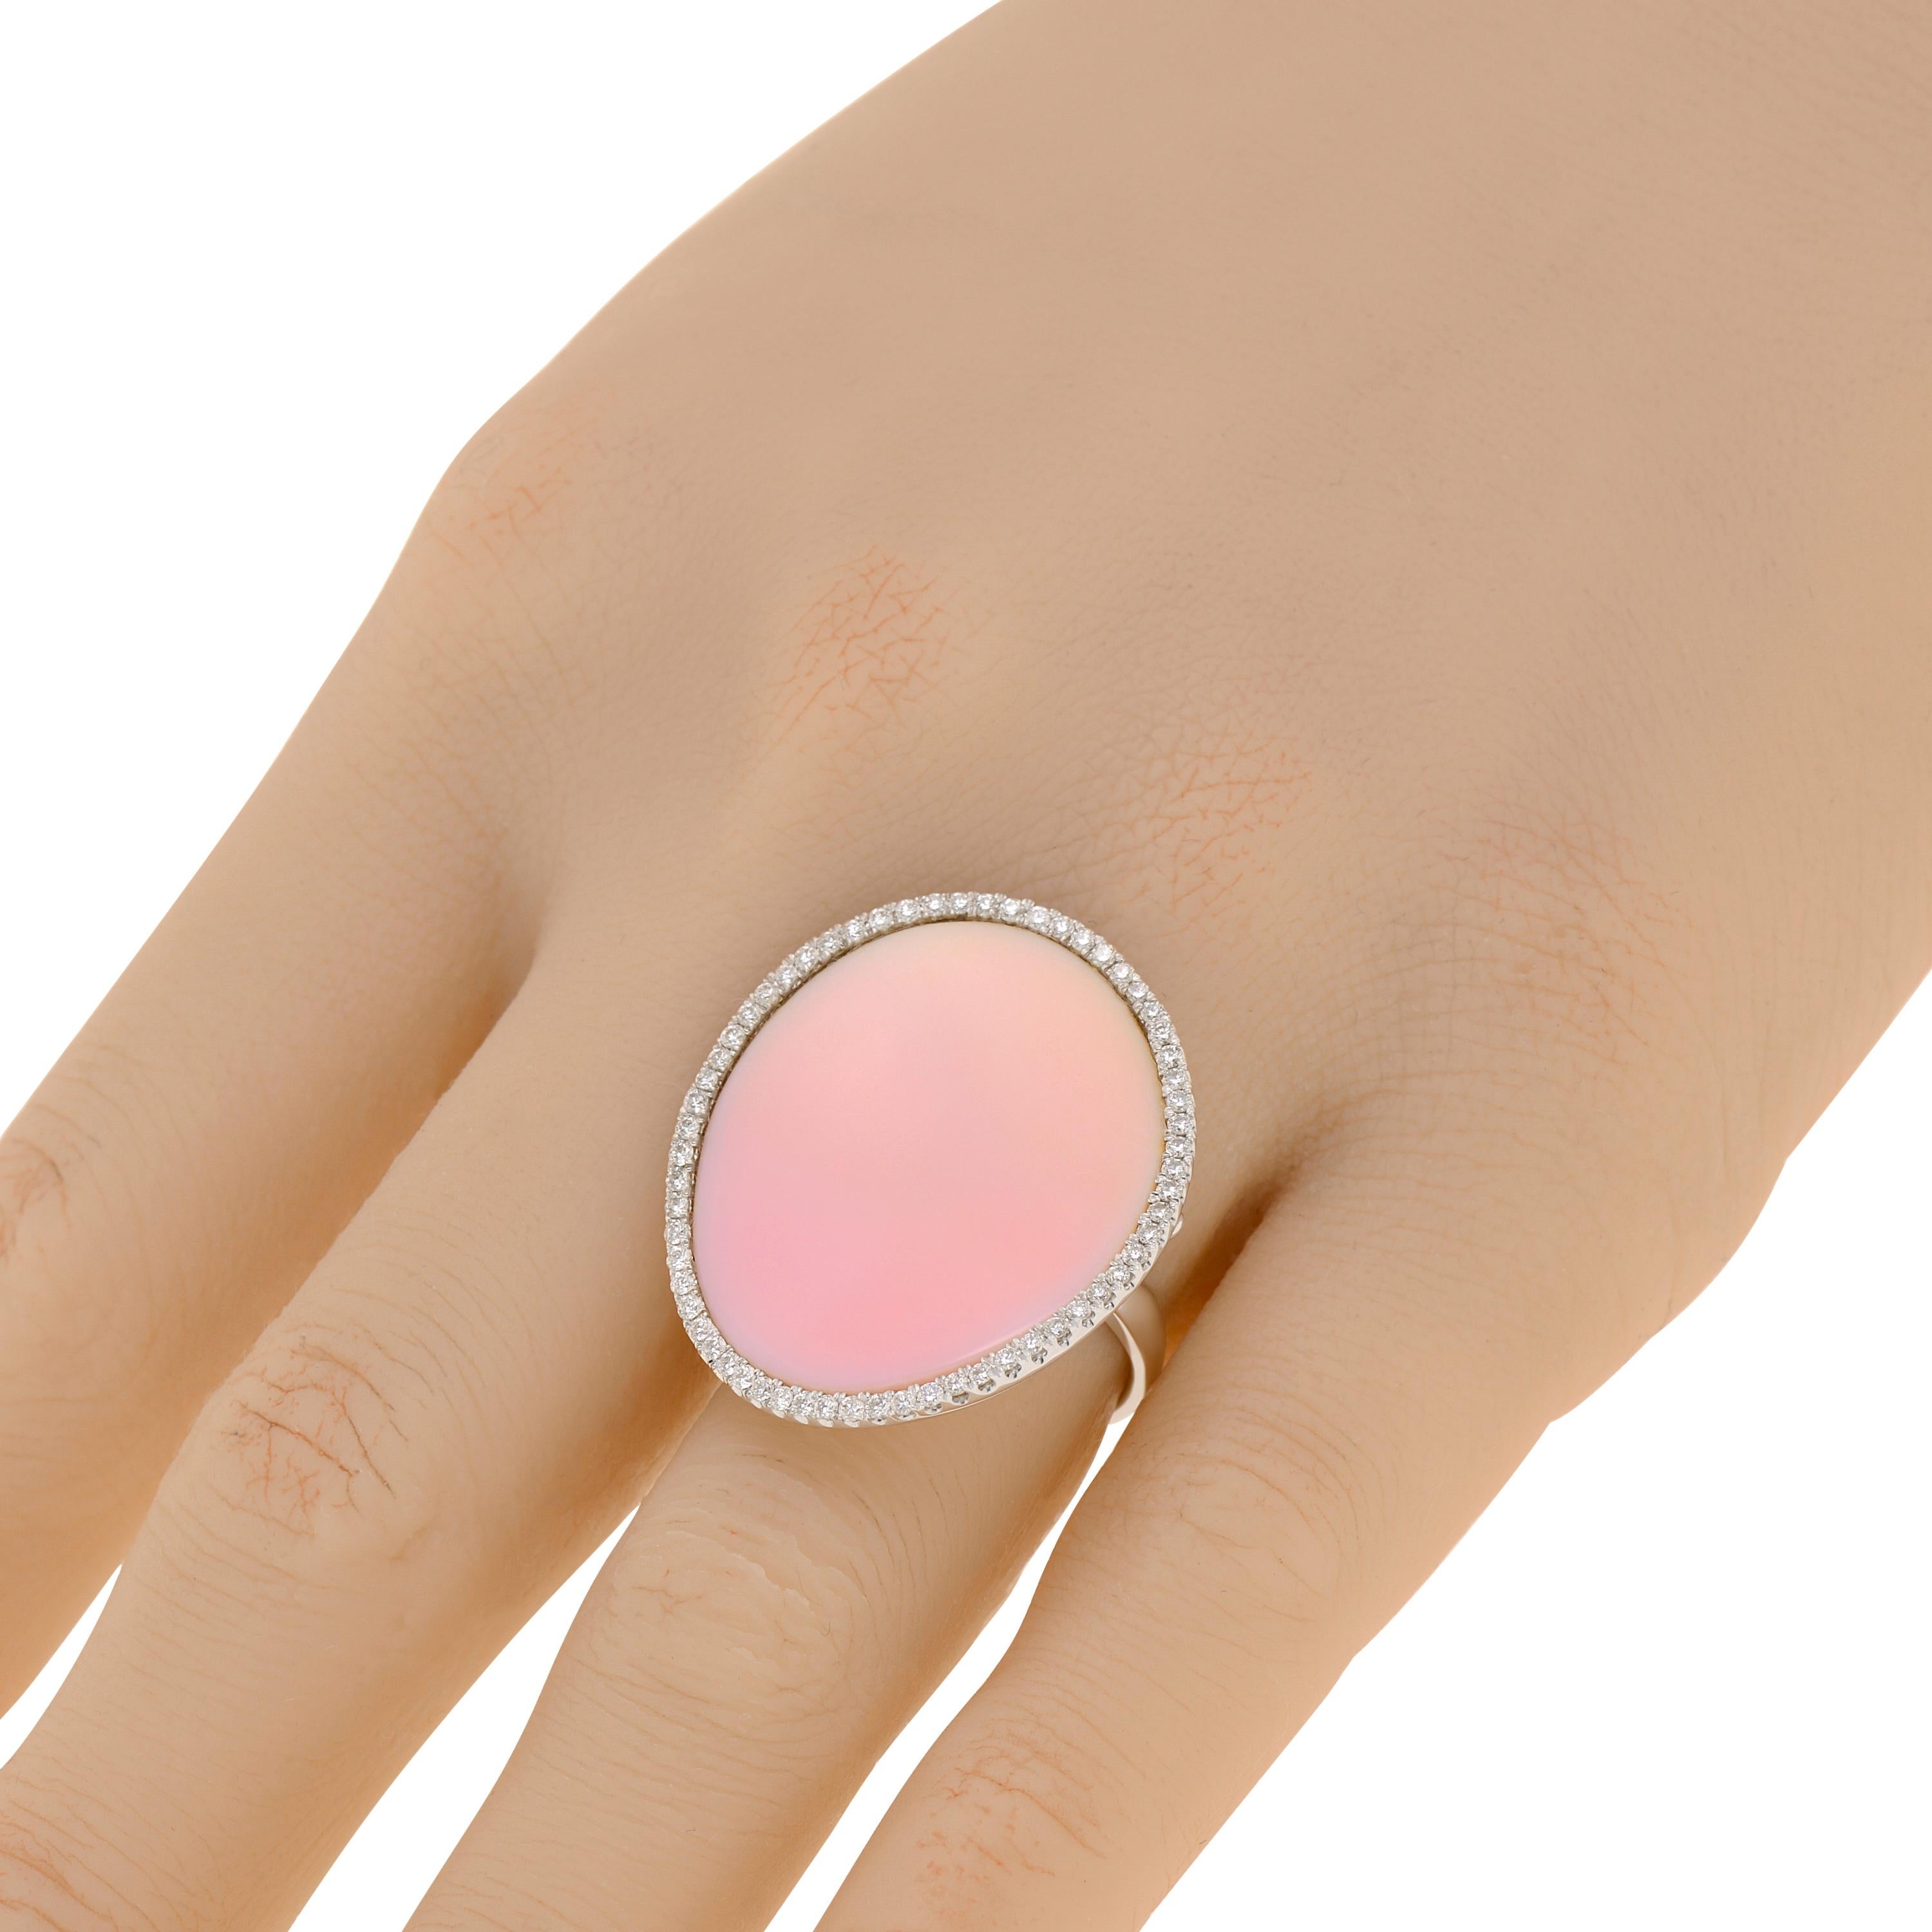 Mimi Milano 18K white gold statement ring features pink Mother of pearl and 0.5ct. tw. diamonds set in 18K rose gold. The ring size is 6 (51.9). The decoration size is 1 1/8